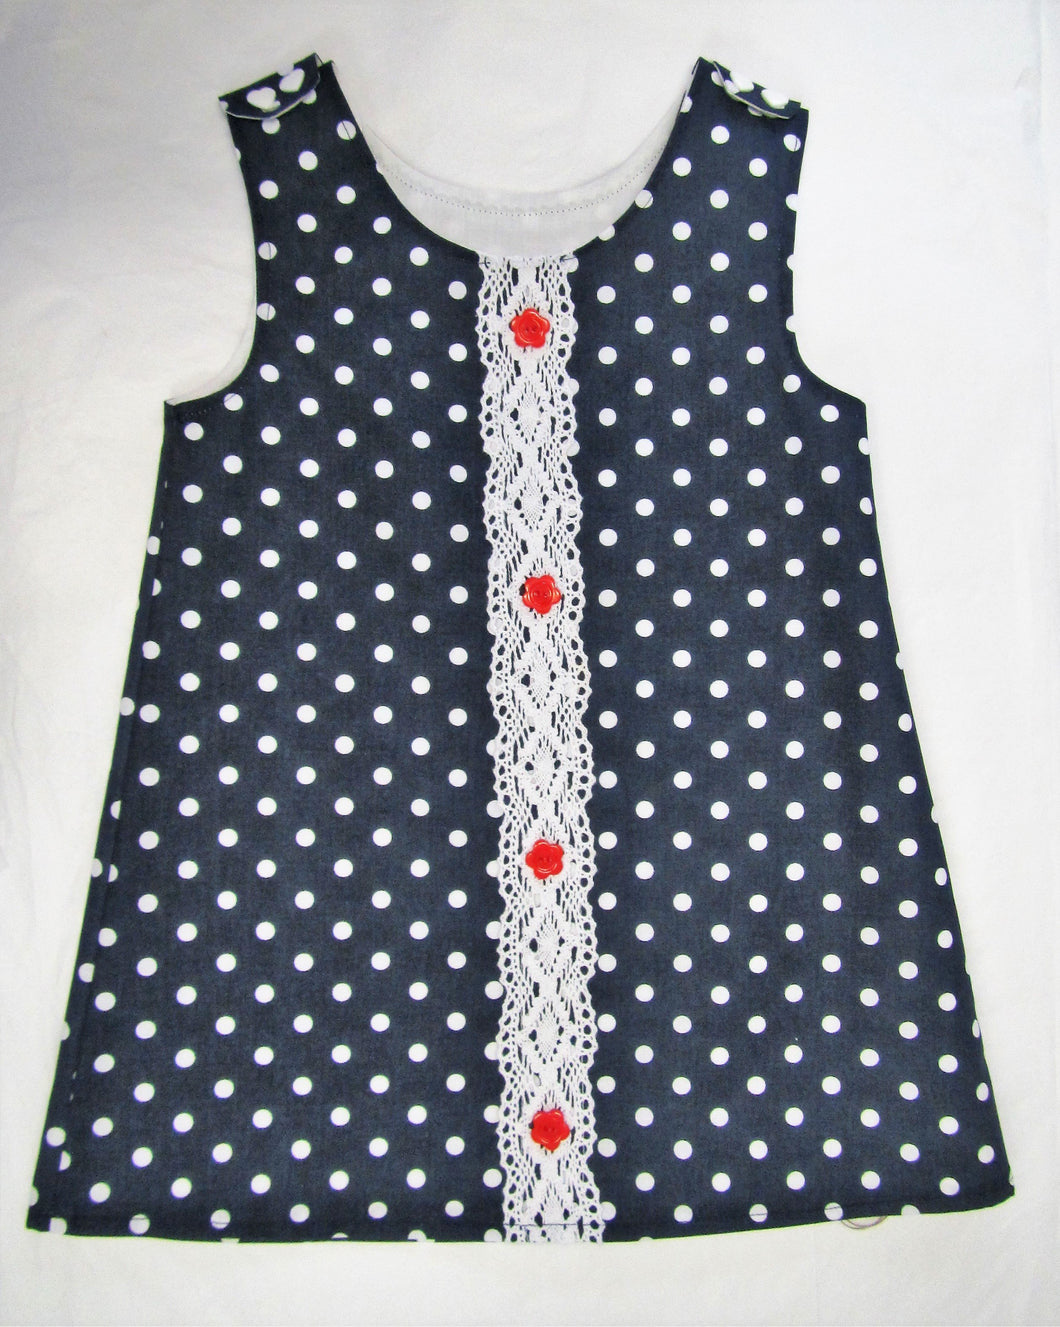 Handcrafted navy polka dot lace pinafore 18-24 months